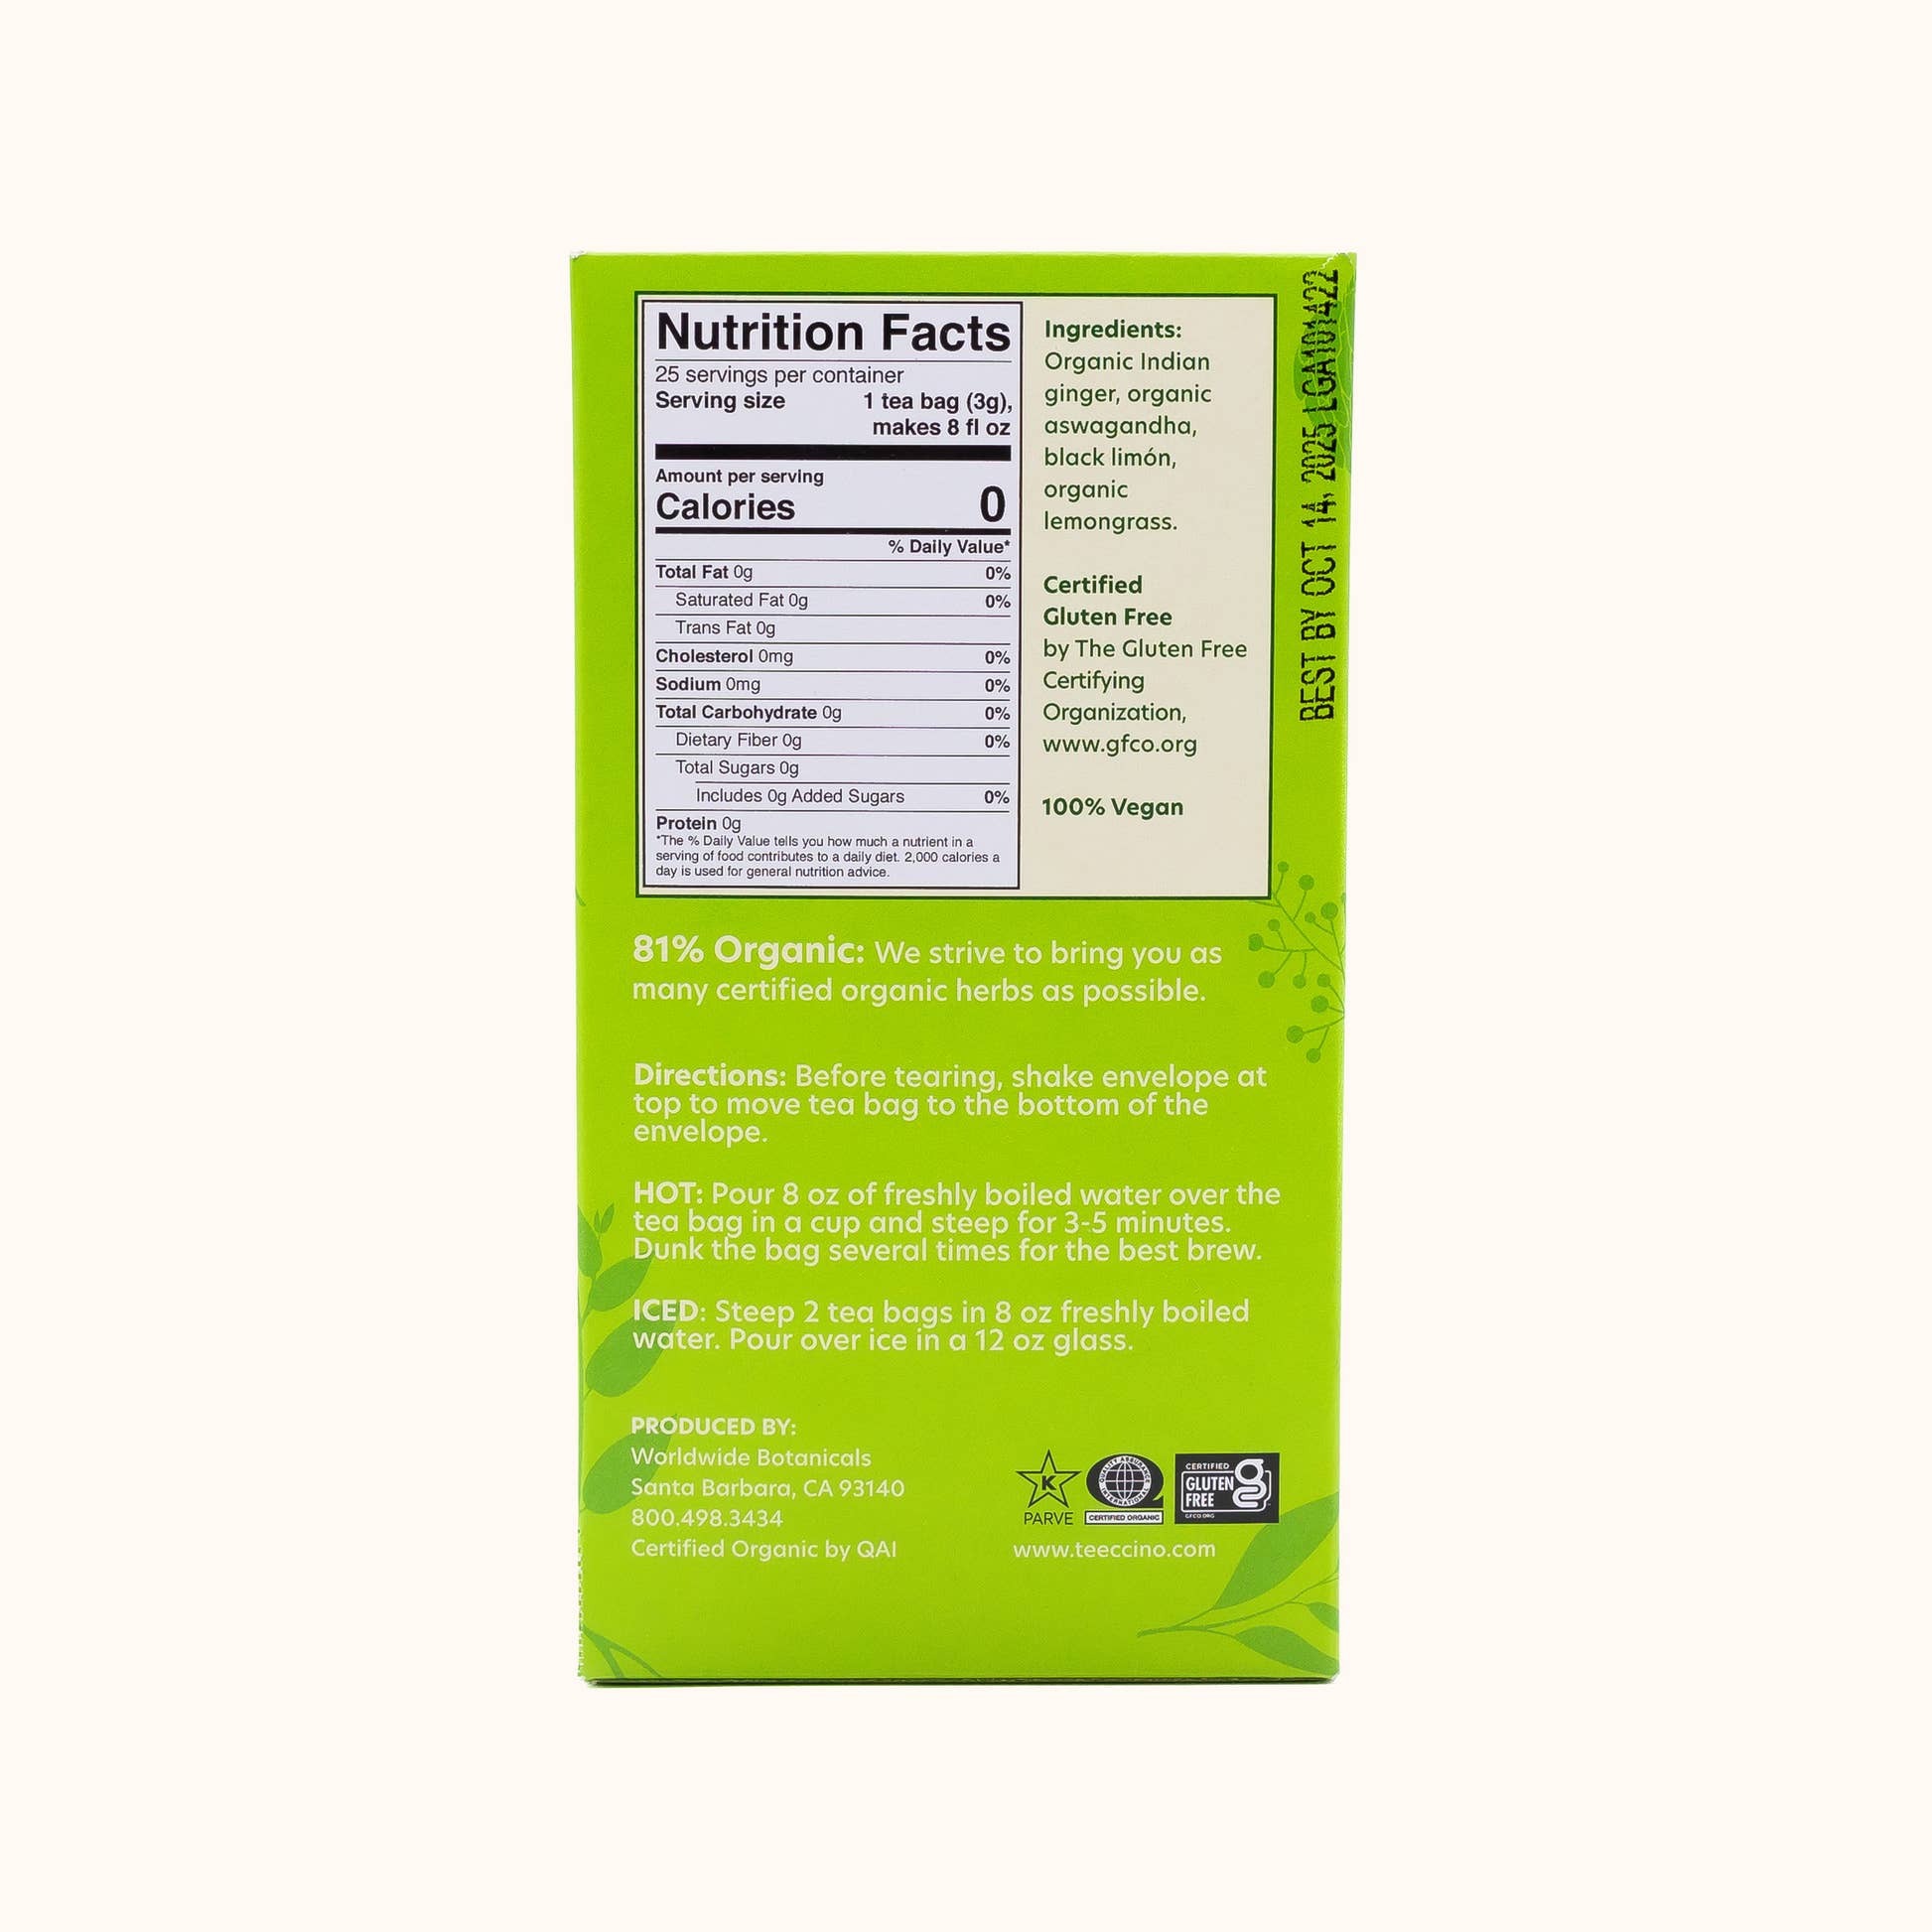 Lemon Ginger Ashwagandha Tea by Worldwide Botanicals green and yellow tea bag box back with directions, nutrition facts, and ingredients